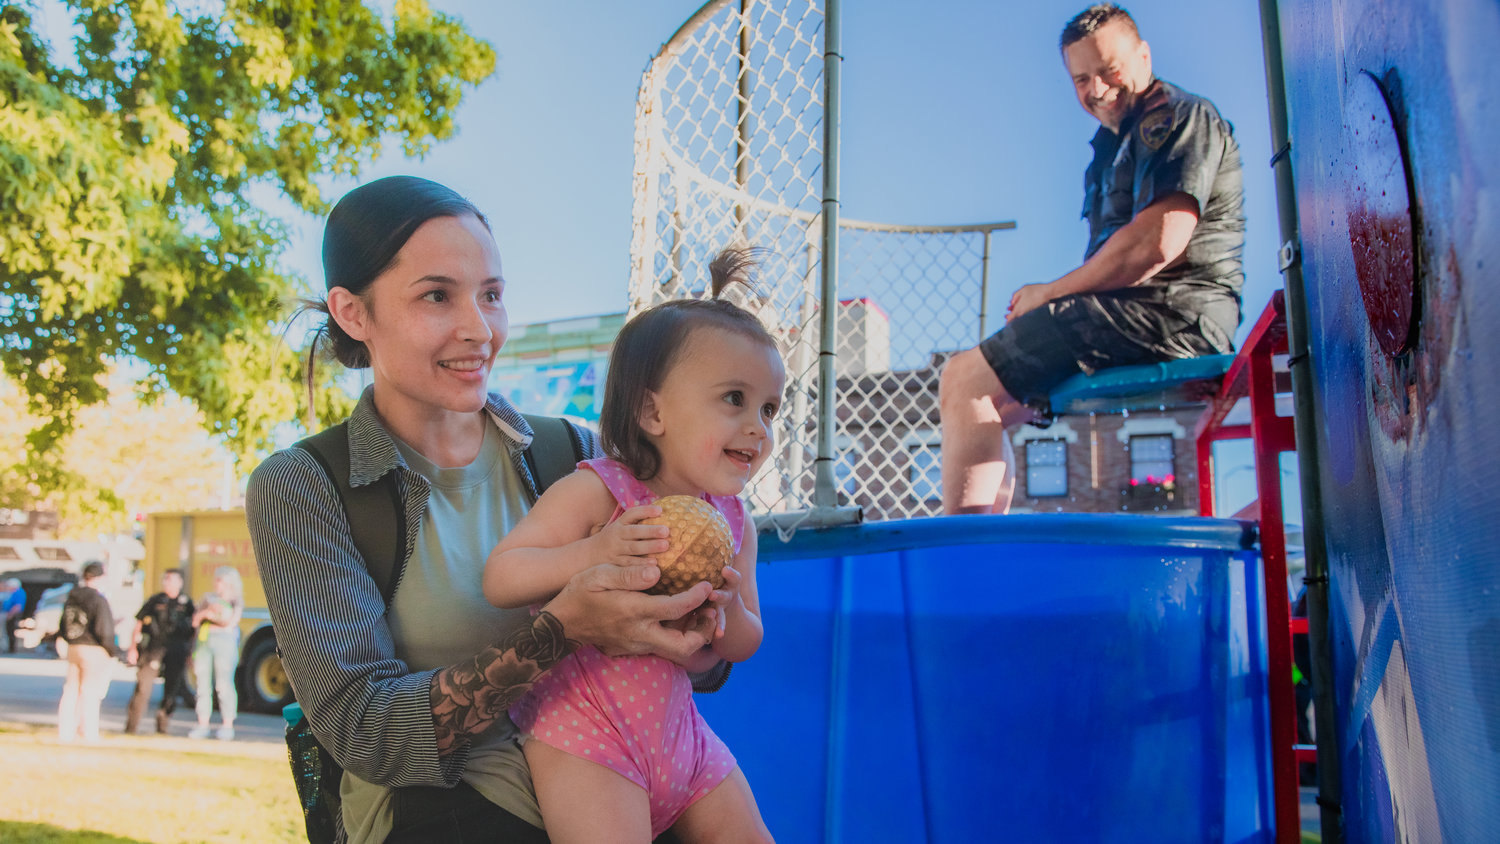 Genesis Gonzalez, 2, prepares to soak Centralia Police Chief Stacy Denham in a dunk tank Tuesday at George Washington Park during a National Night Out event.